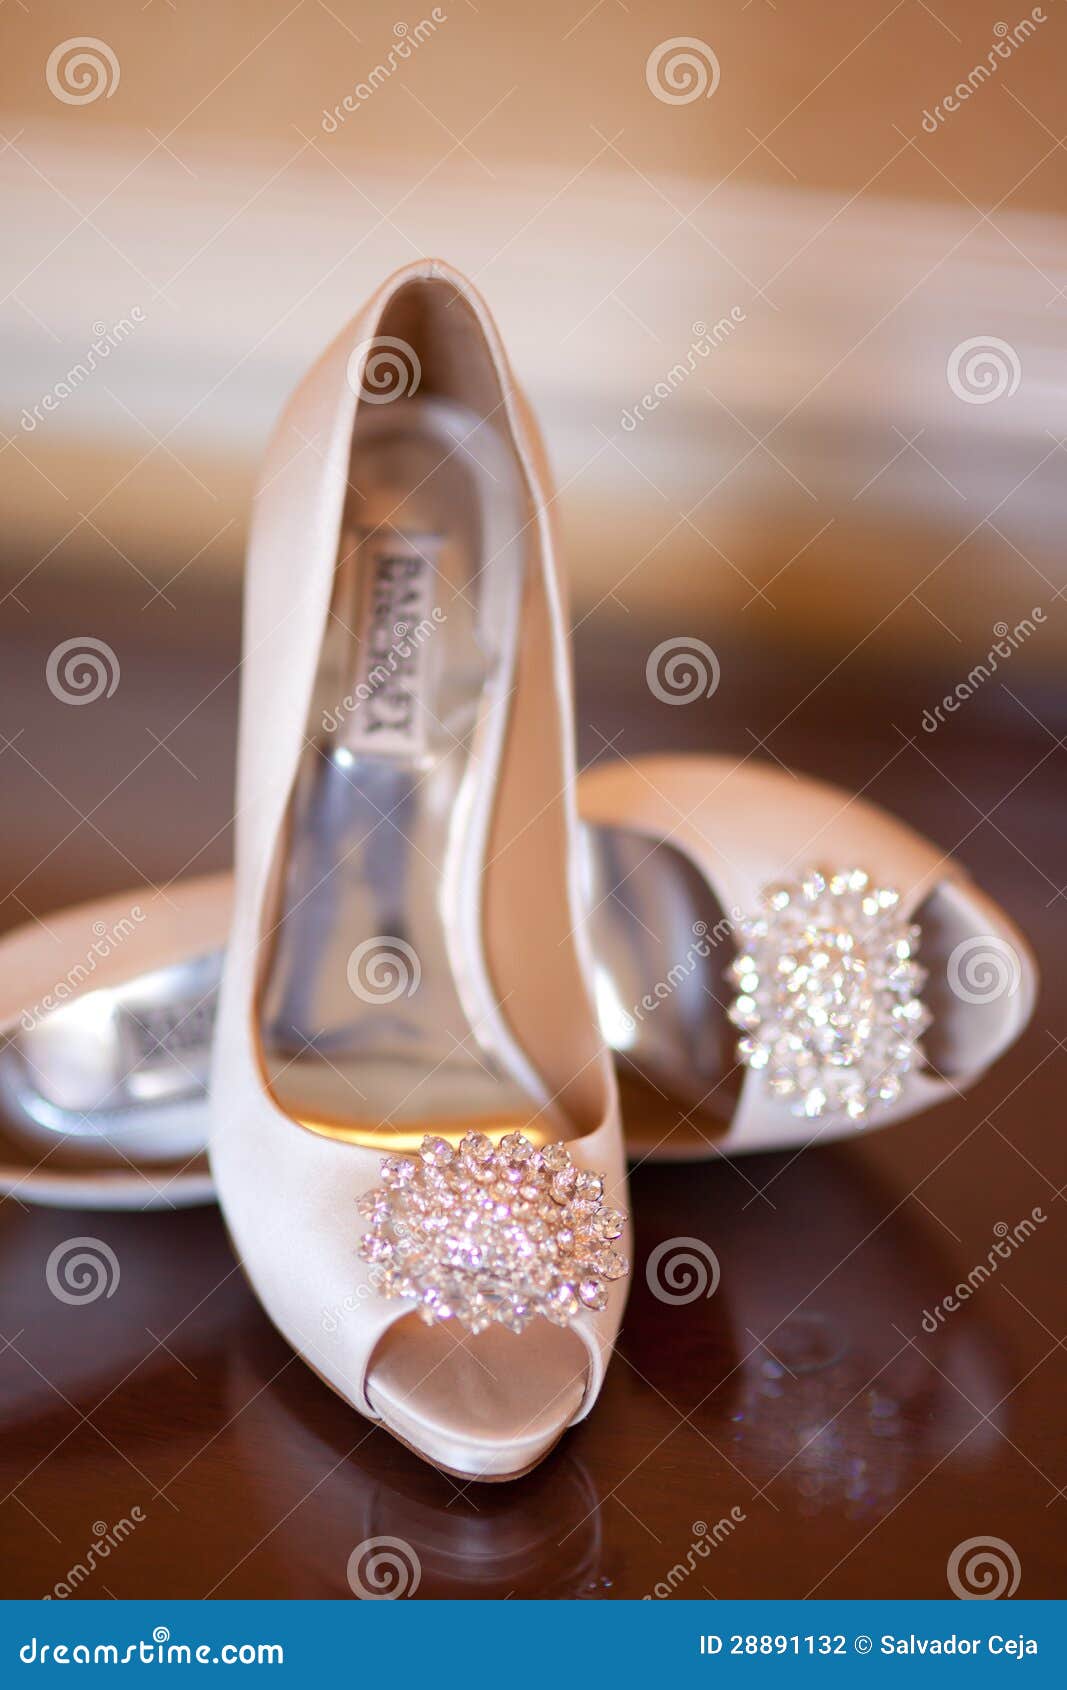 Wedding Shoes High Heels stock photo. Image of spring - 28891132